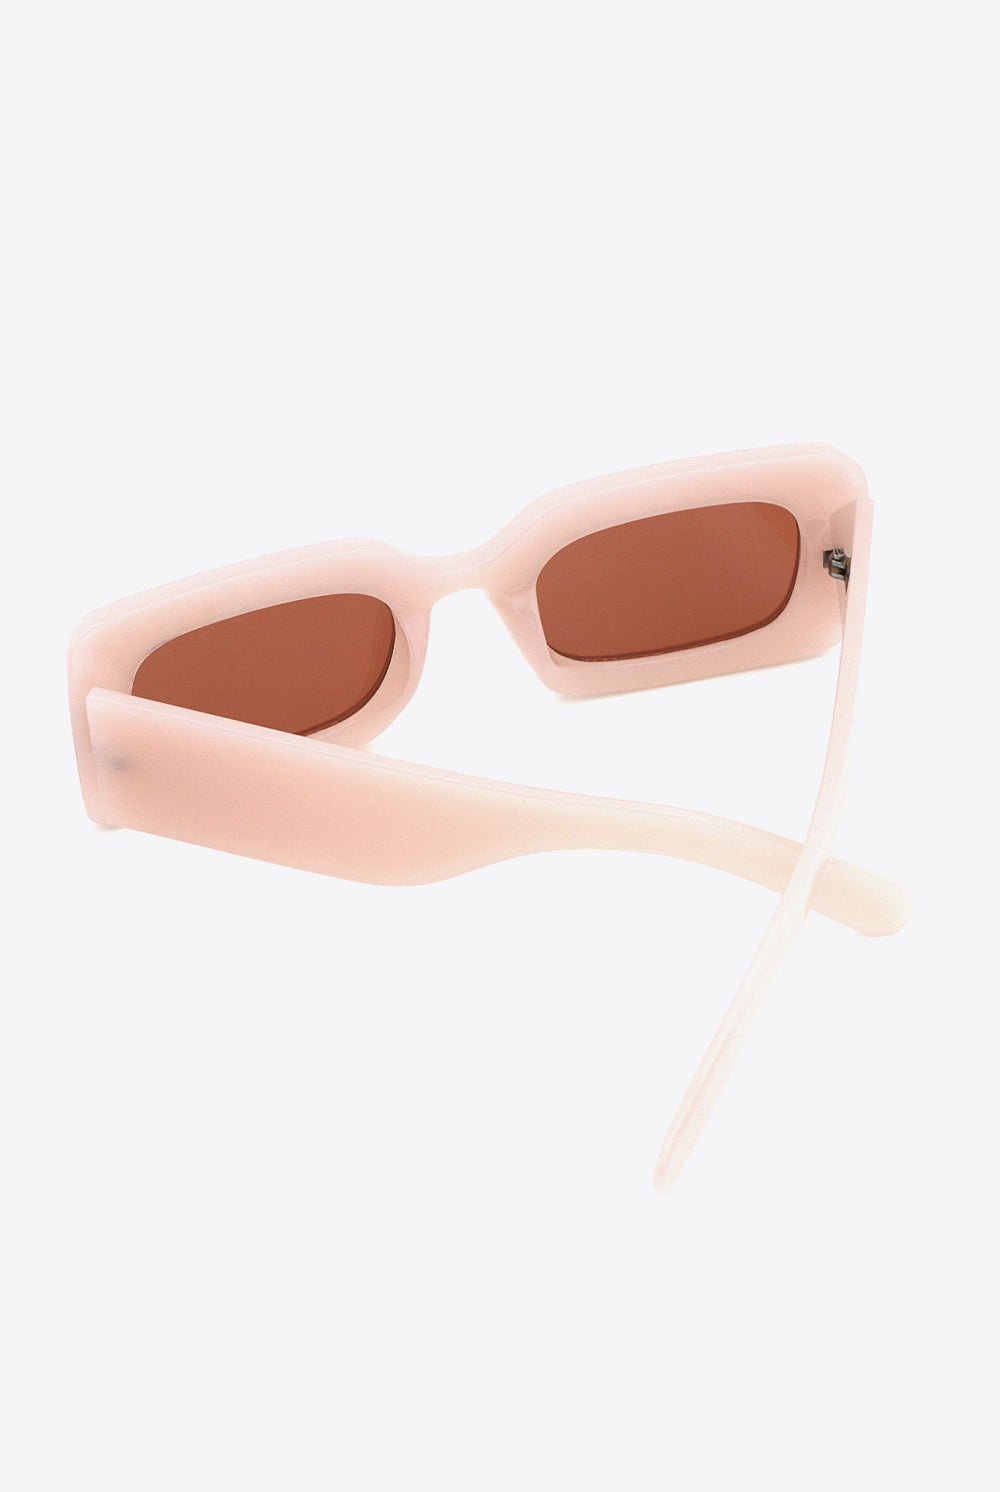 White Smoke First Of All Polycarbonate Frame Rectangle Sunglasses Sunglasses